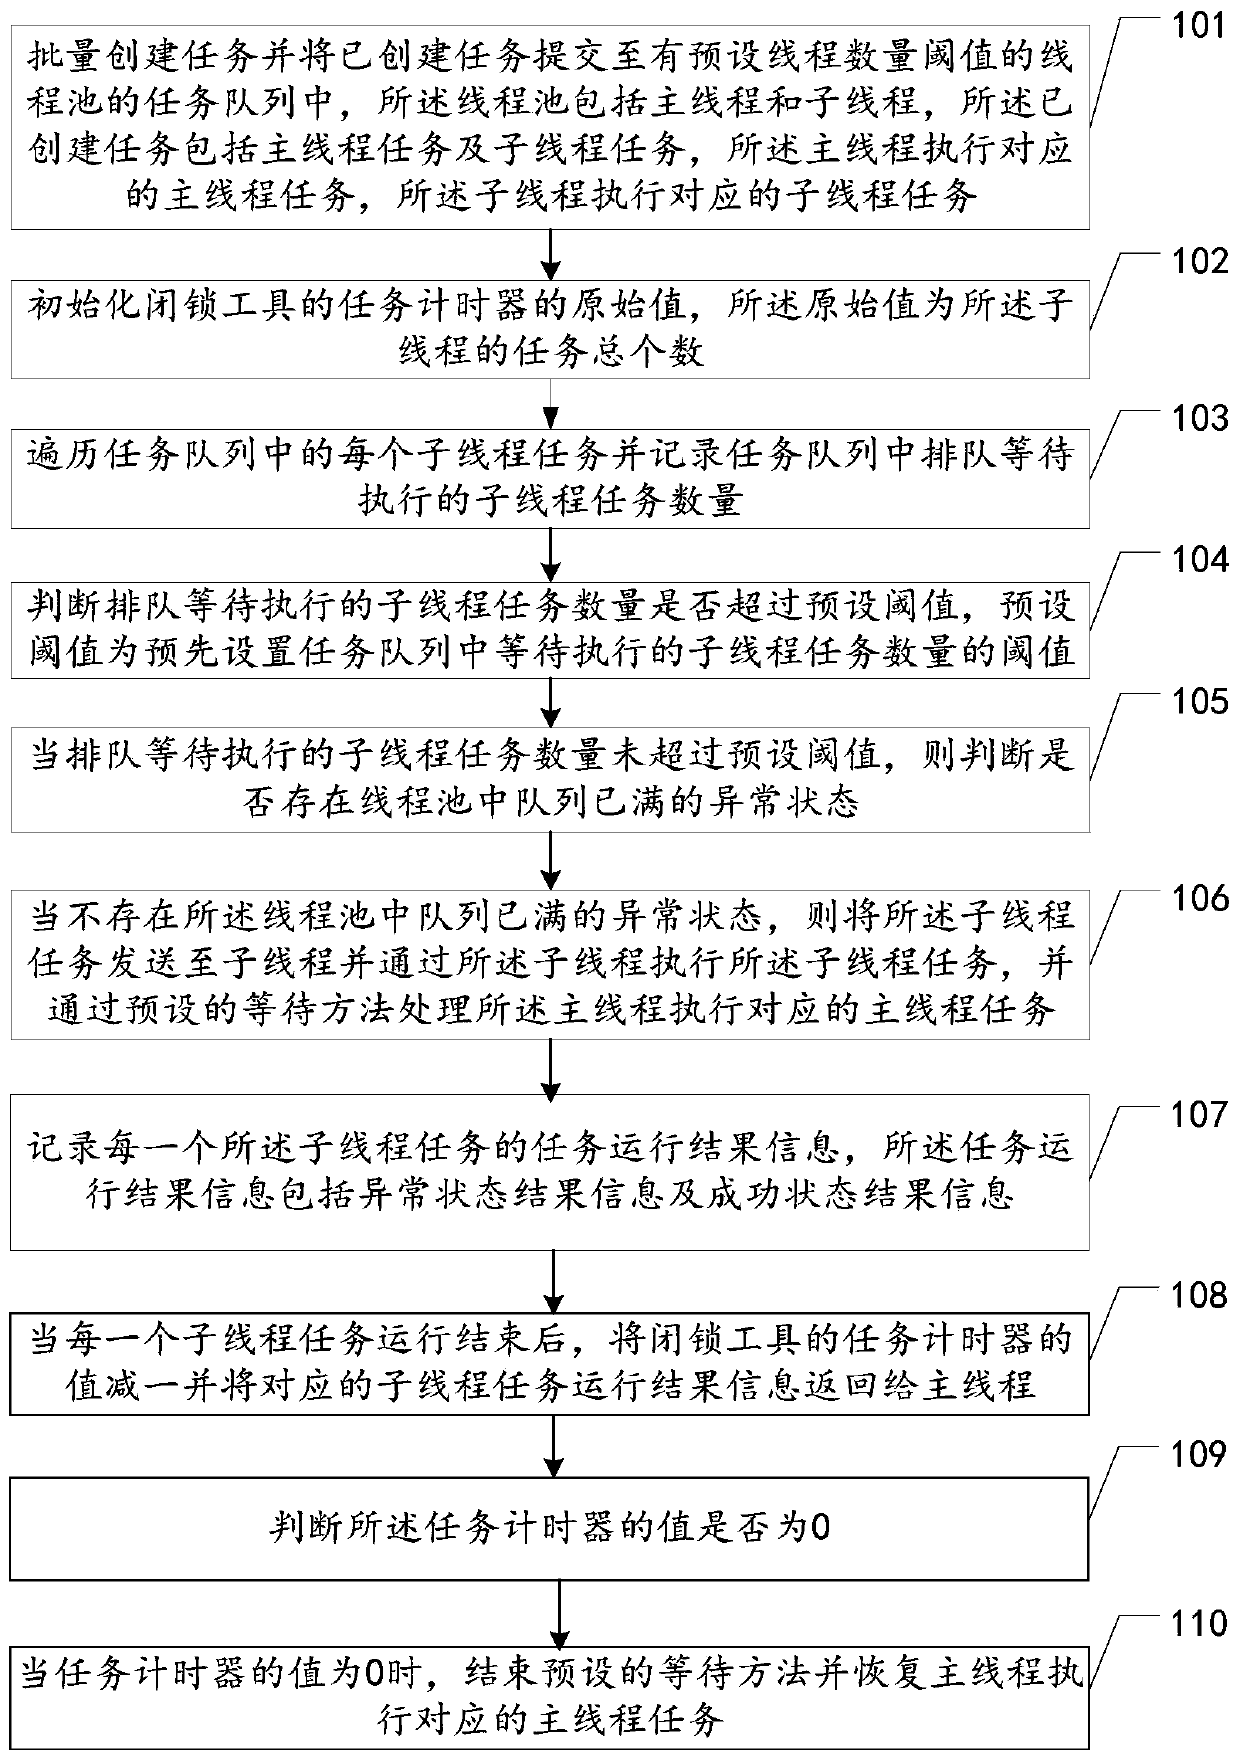 Multi-thread concurrency monitoring method, device and apparatus and storage medium